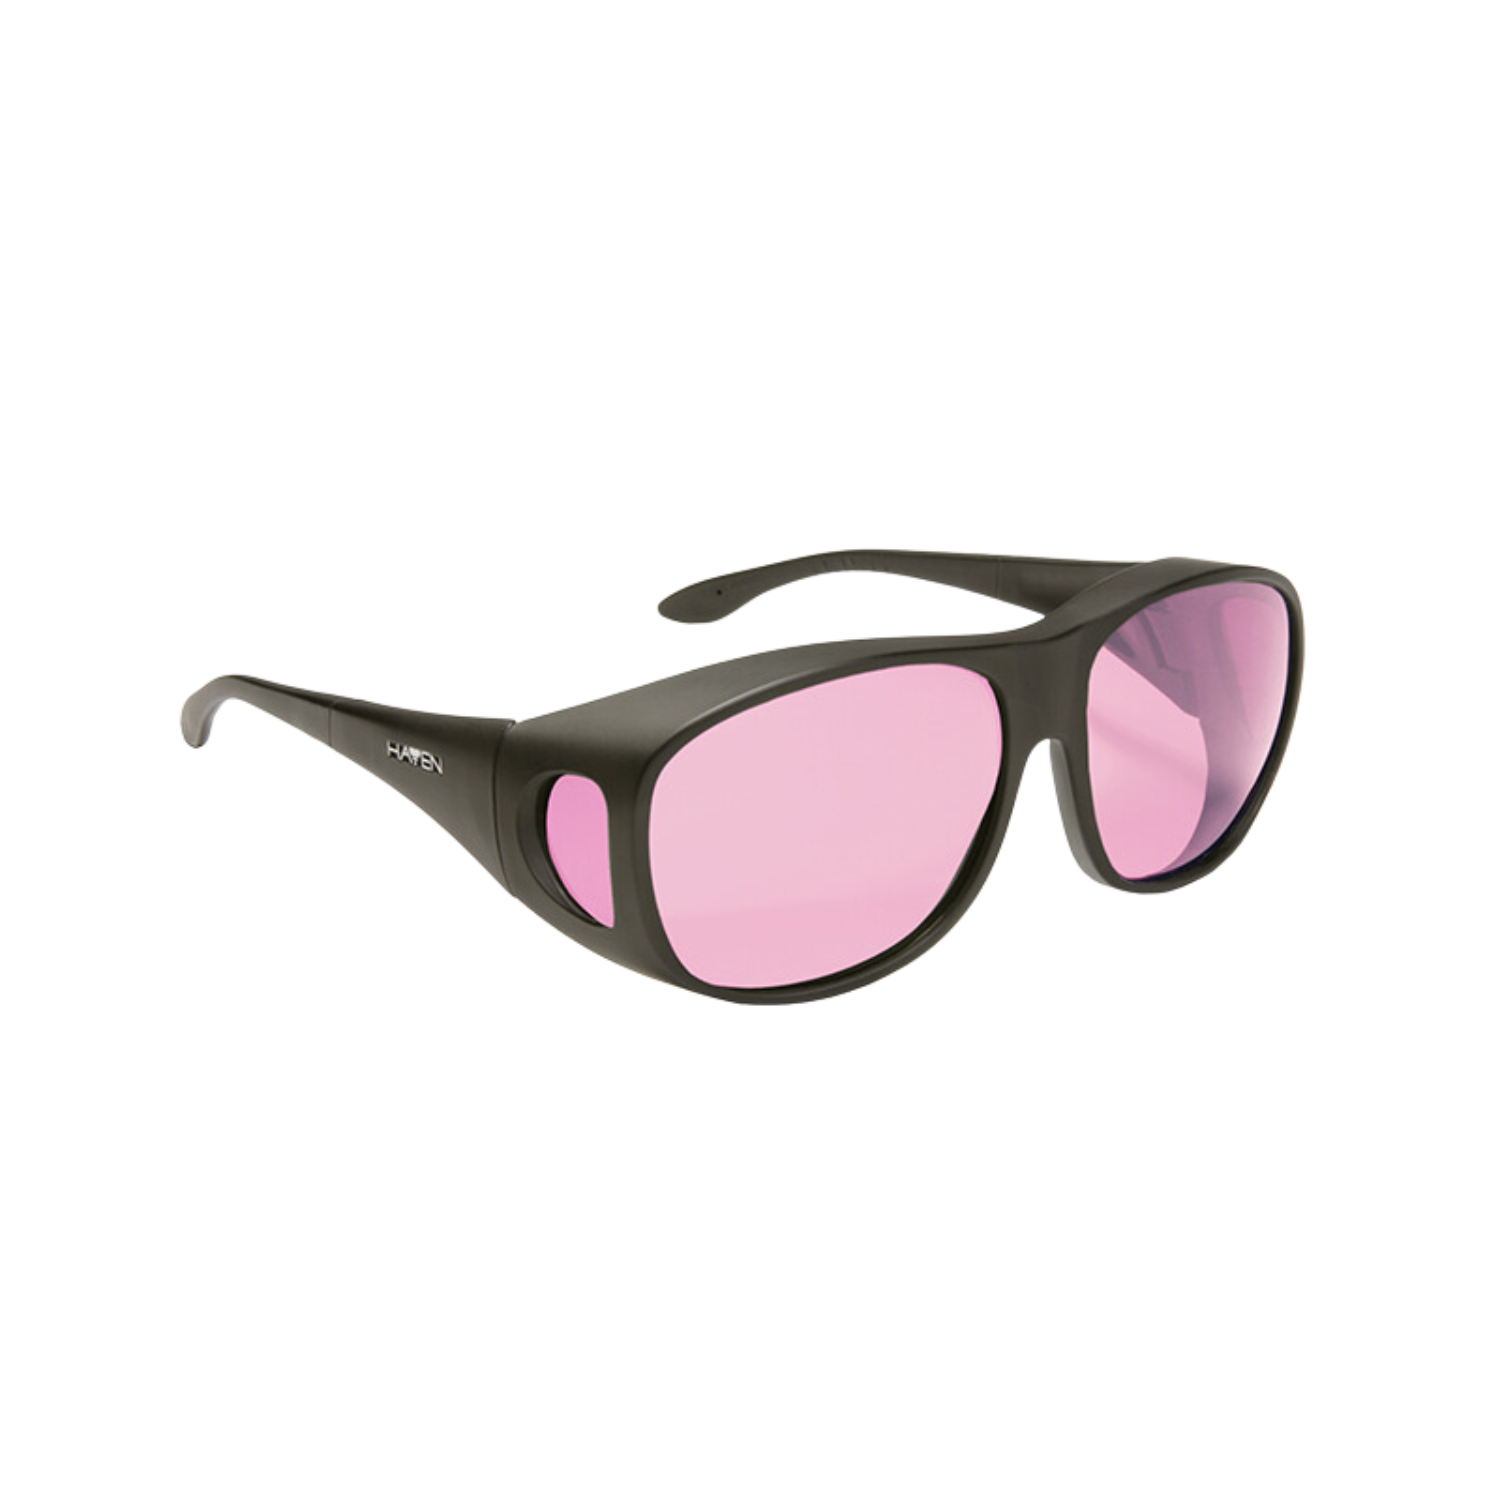 Image of the Haven Summerwood FL-41 light sensitivity sunglasses with light rose tint from Eschenbach.